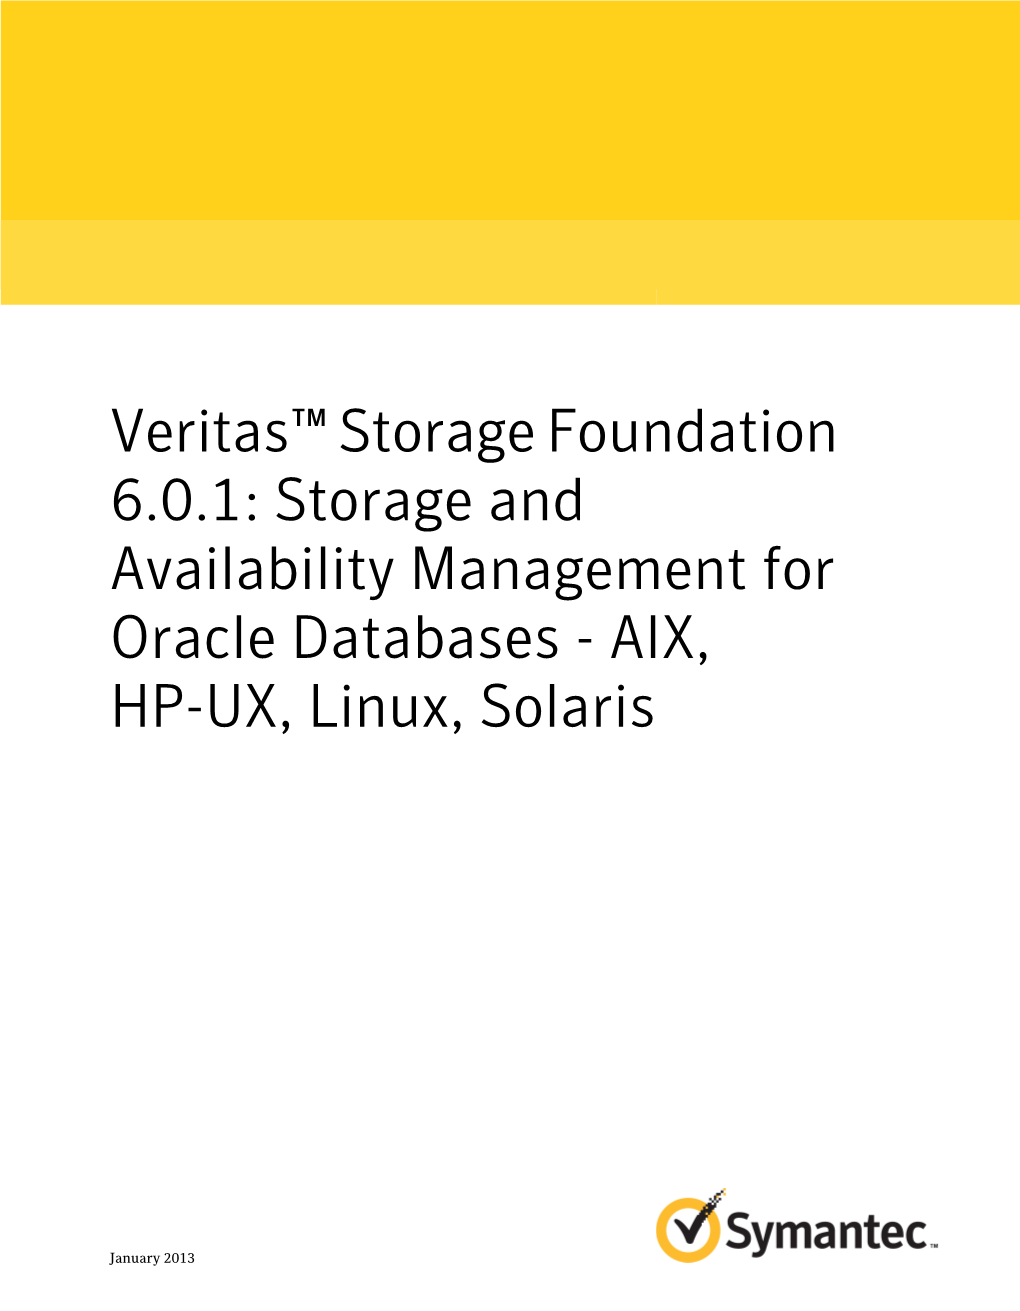 Storage and Availability Management for Oracle Databases - AIX, HP-UX, Linux, Solaris